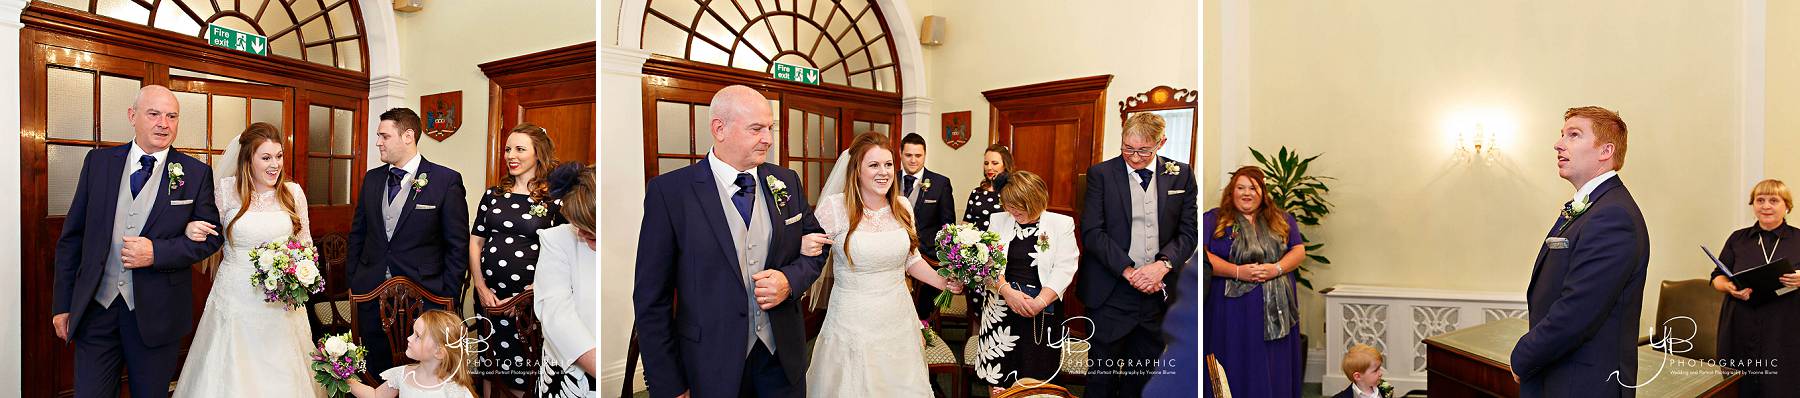 Chelsea Register Office wedding photography by YBPHOTOGRAPHIC